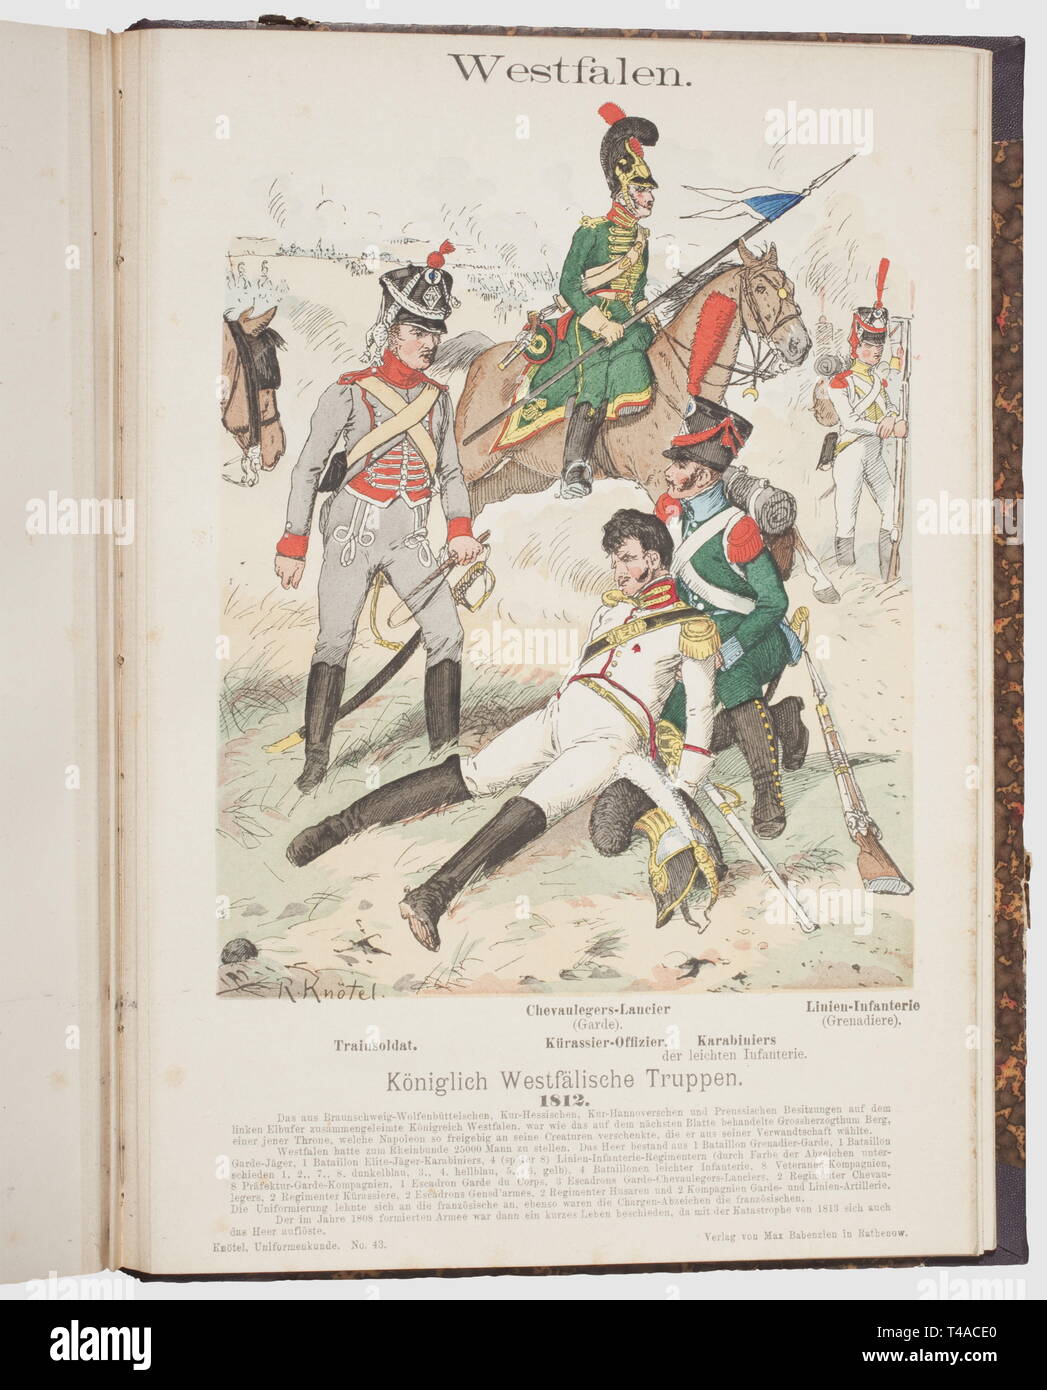 Richard Knötel, 'Uniformkunde - Lose Blätter zur Entwicklung der militärischen Tracht', ('Flying leaves' on the evolution of military dress), Rathenow and Hamburg (1892 - 1932). Complete edition in 18 volumes with 1,060 hand coloured tables depicting the evolution of European uniforms from the 17th to the 19th century. All volumes half-linen bound with gold-stamped spines. An important standard work, rarely offered as a complete set, historic, historical, people, 19th century, object, objects, stills, clipping, clippings, cut out, cut-out, cut-ou, Additional-Rights-Clearance-Info-Not-Available Stock Photo